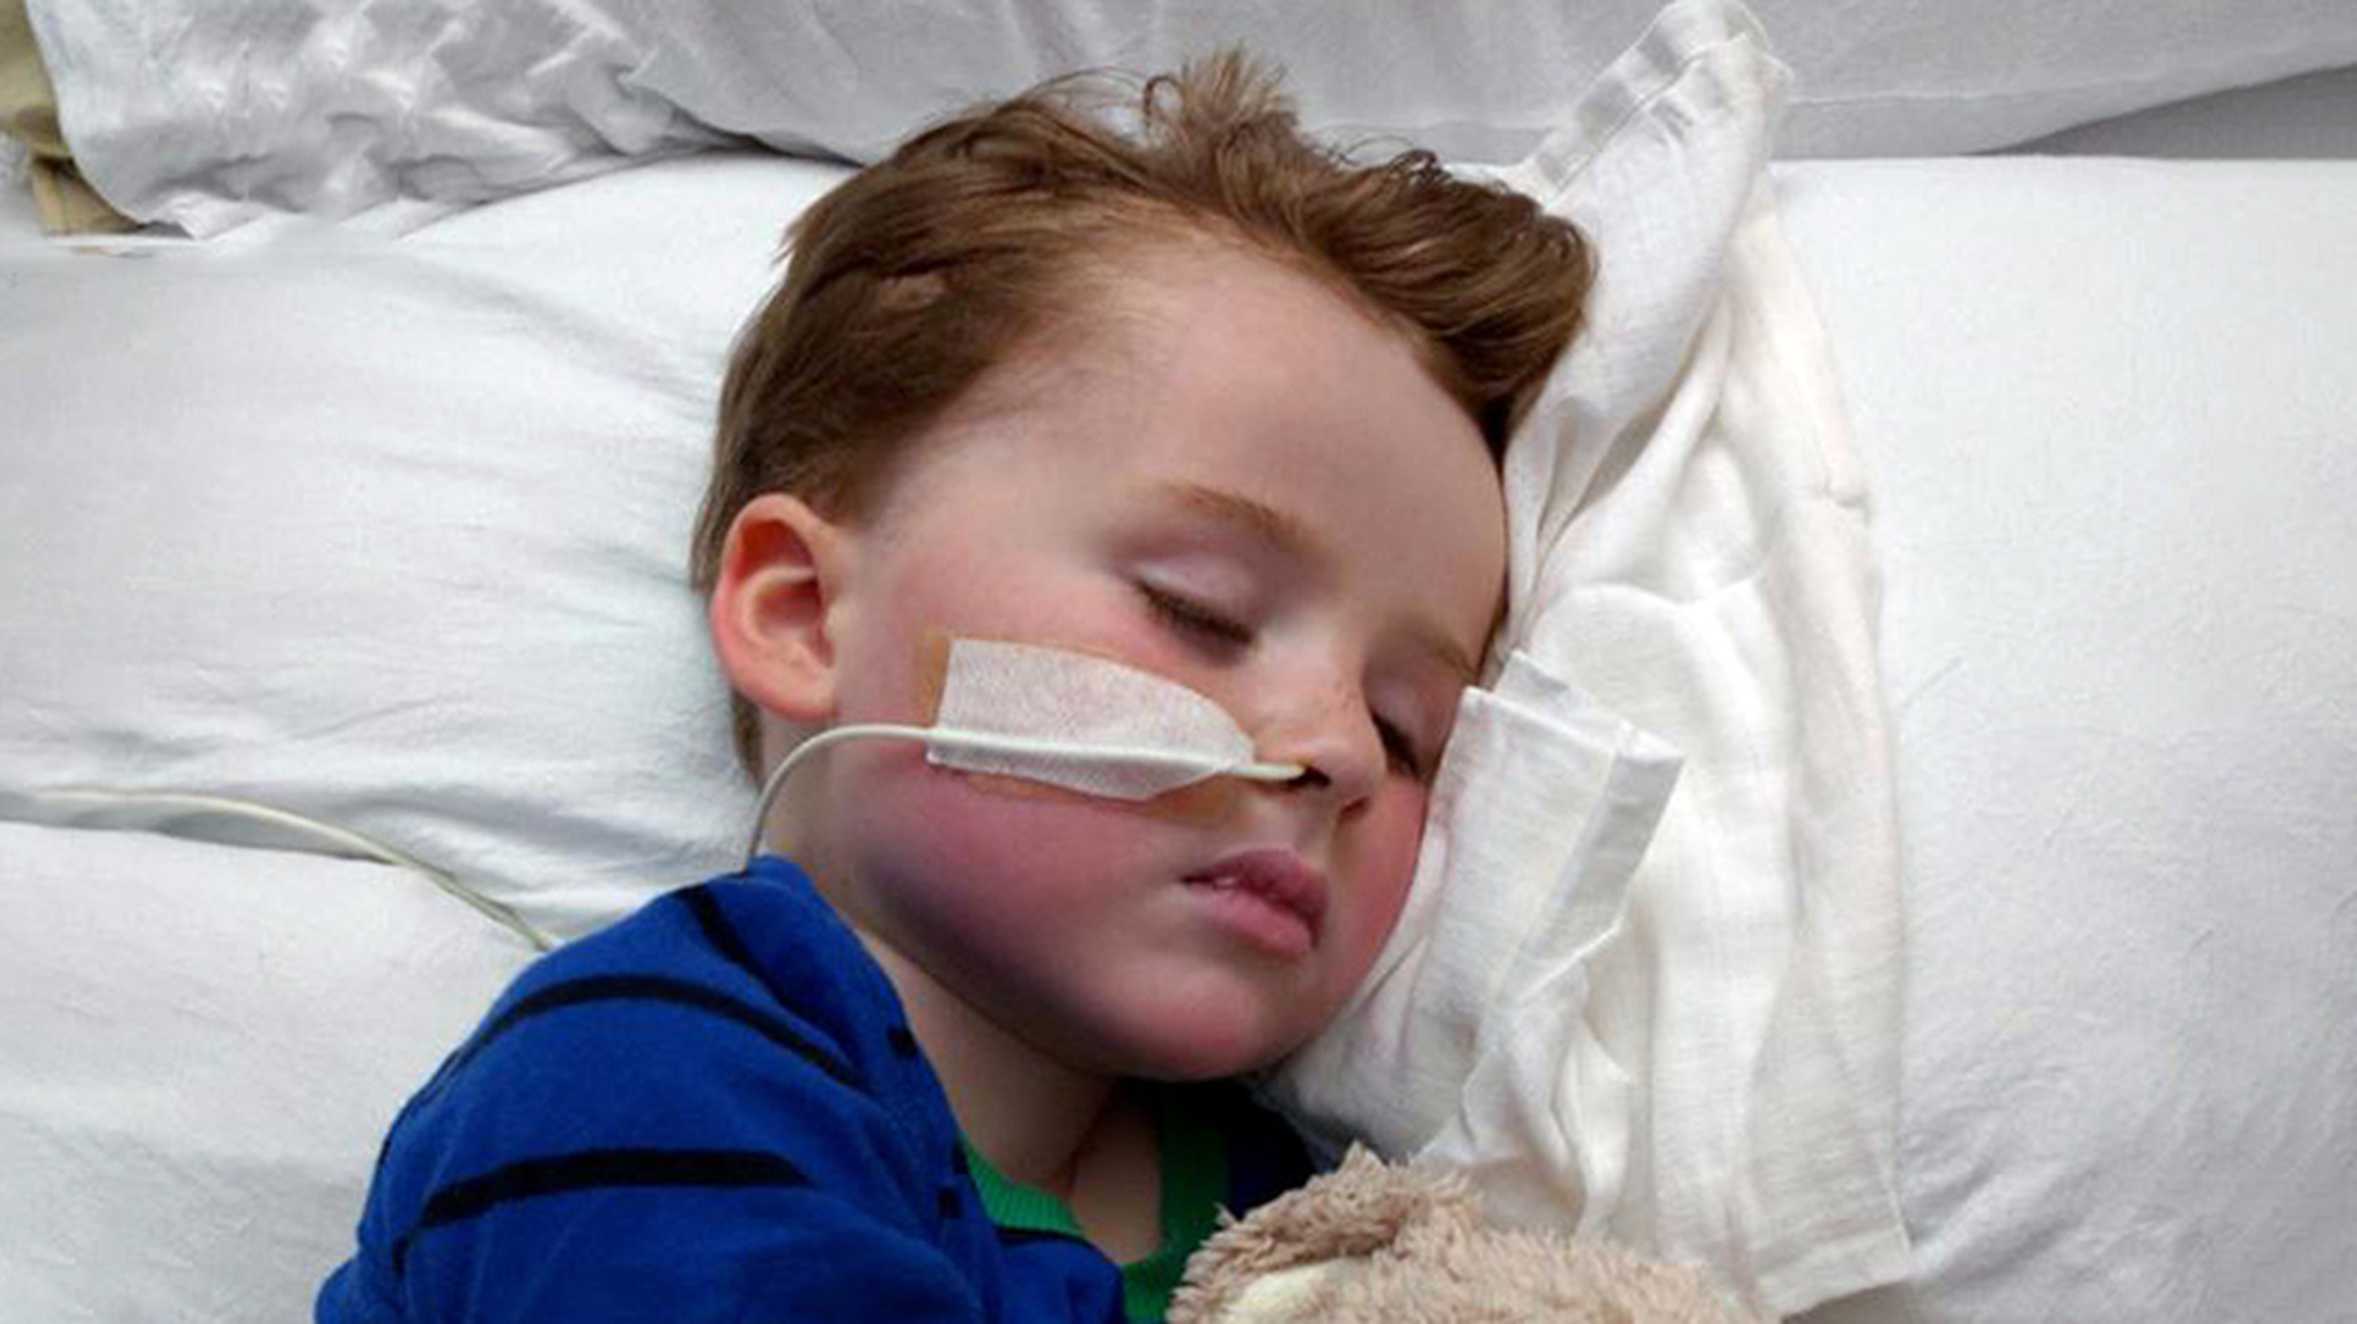 Joseph asleep in his hospital bed during his treatment